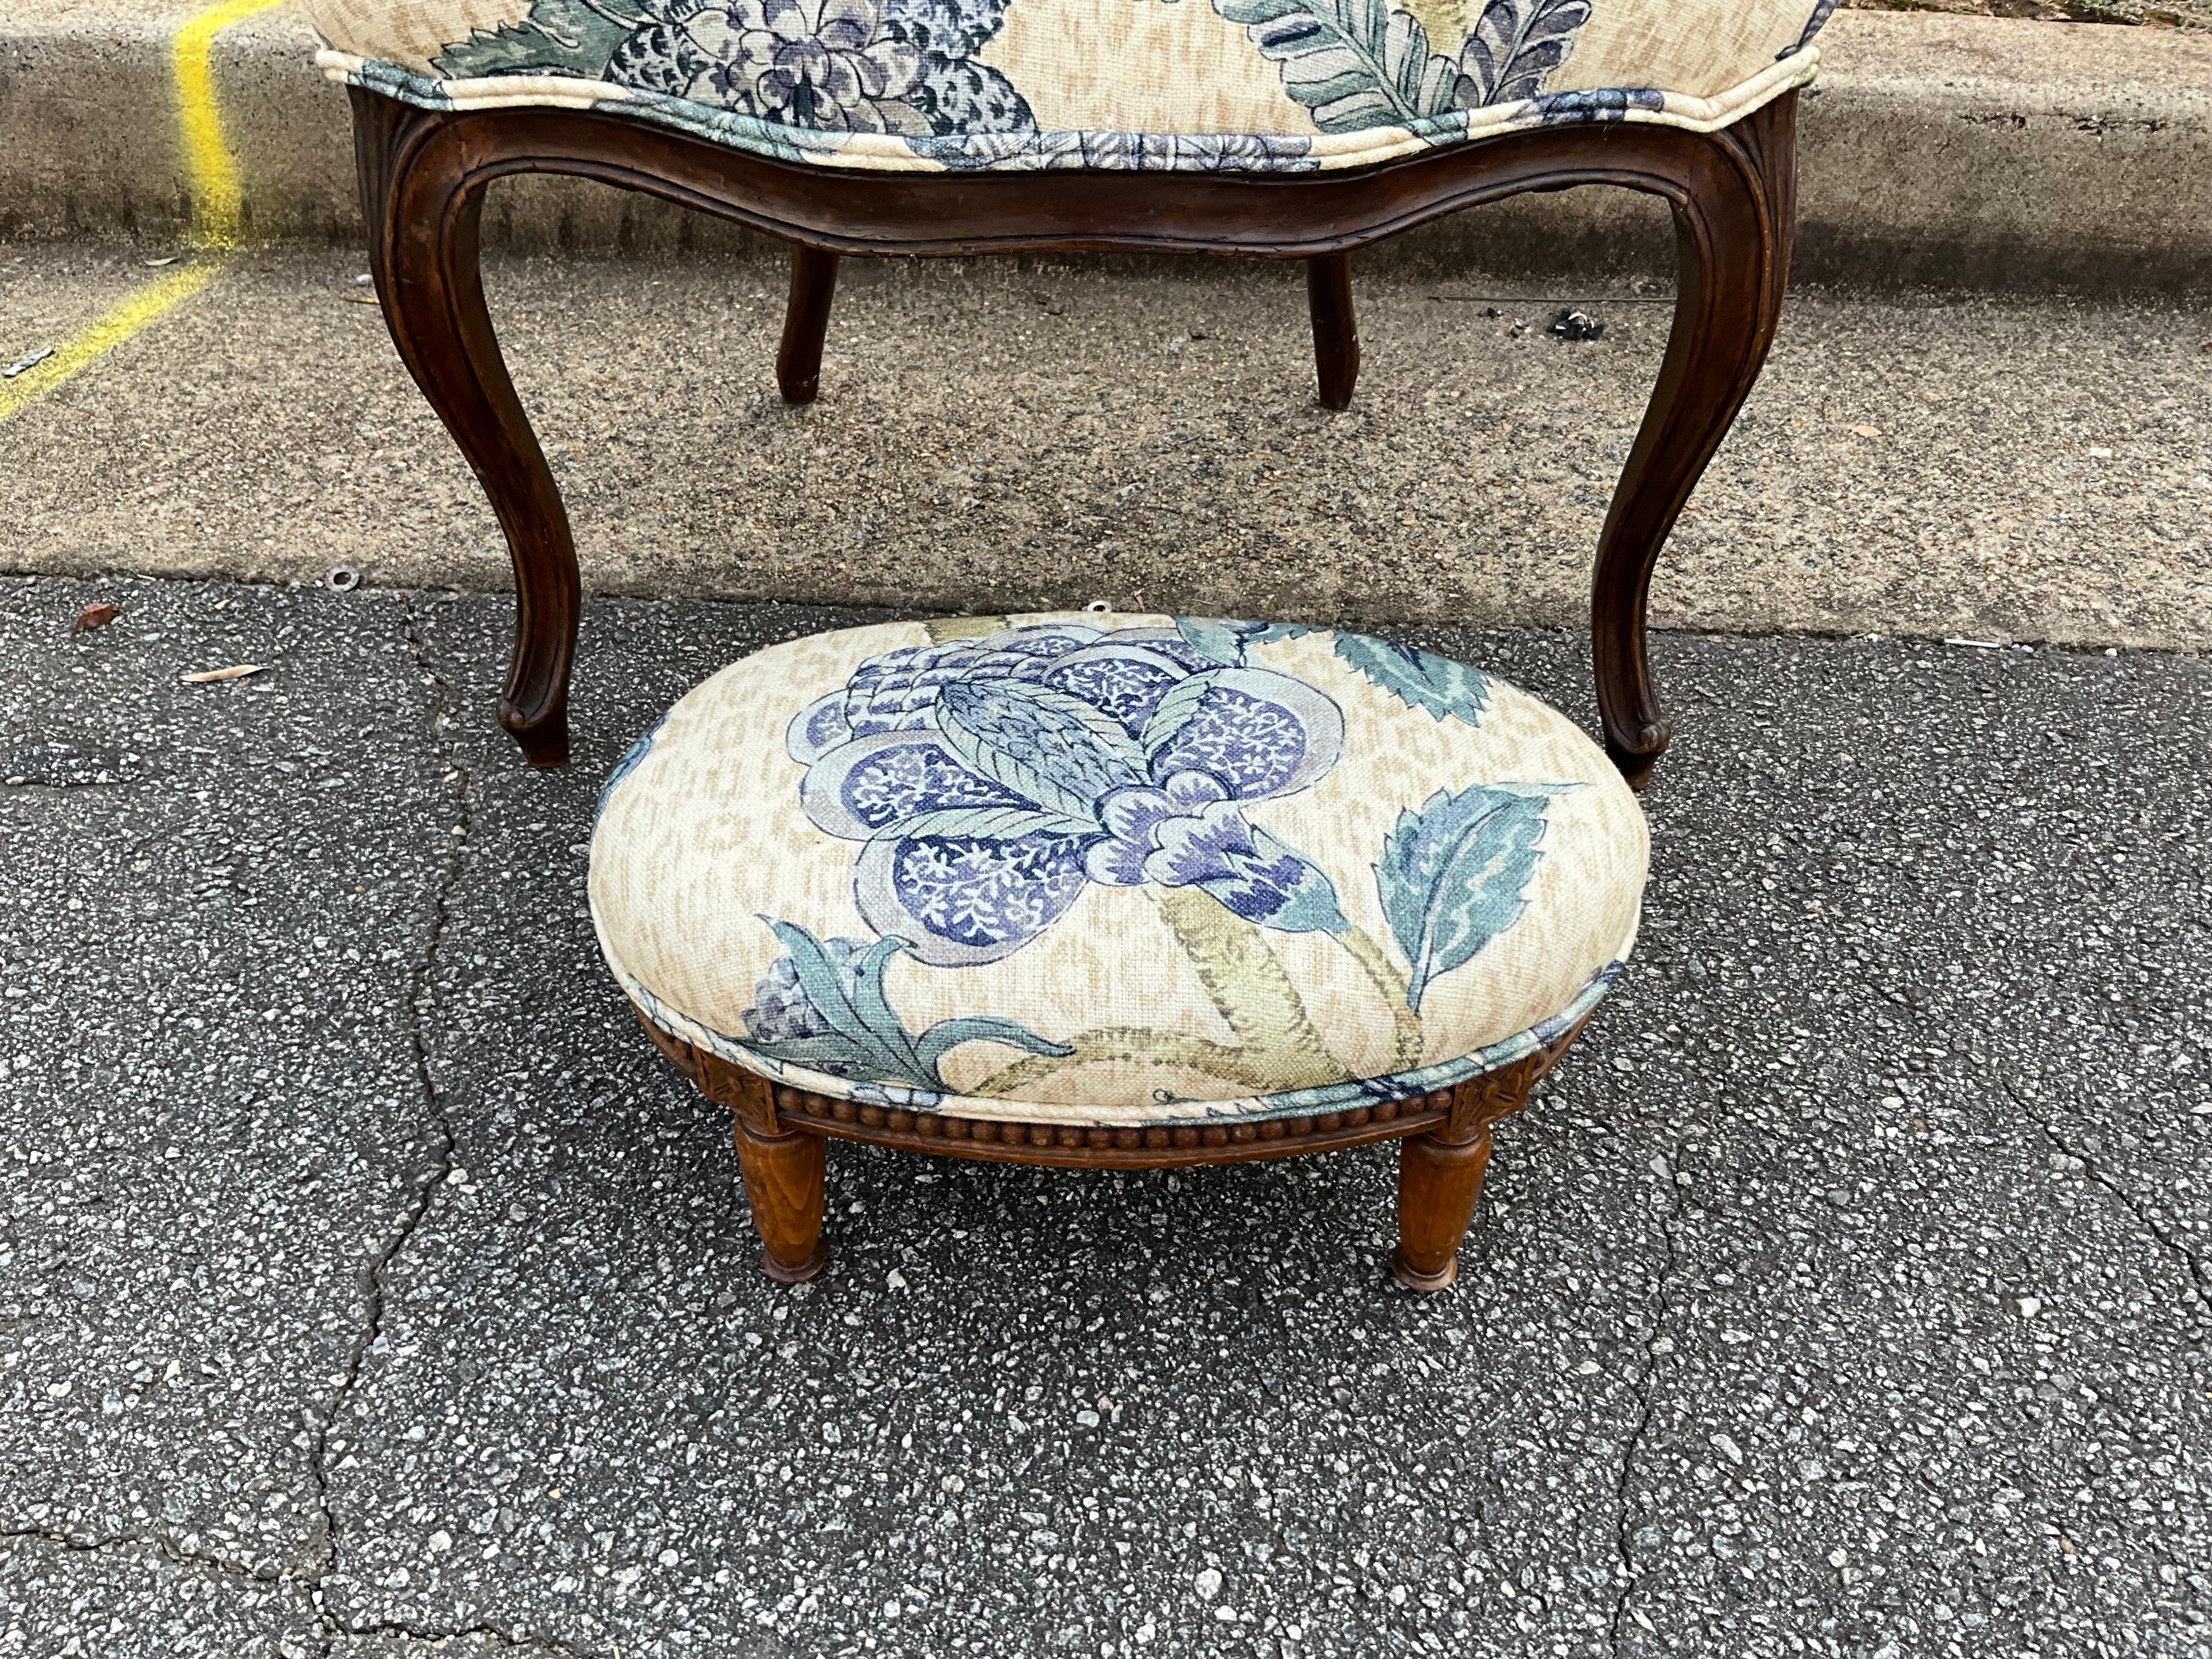 Antique French Fruitwood Berger Chair & Ottoman In Blue Floral & Leopard - S/2 For Sale 1